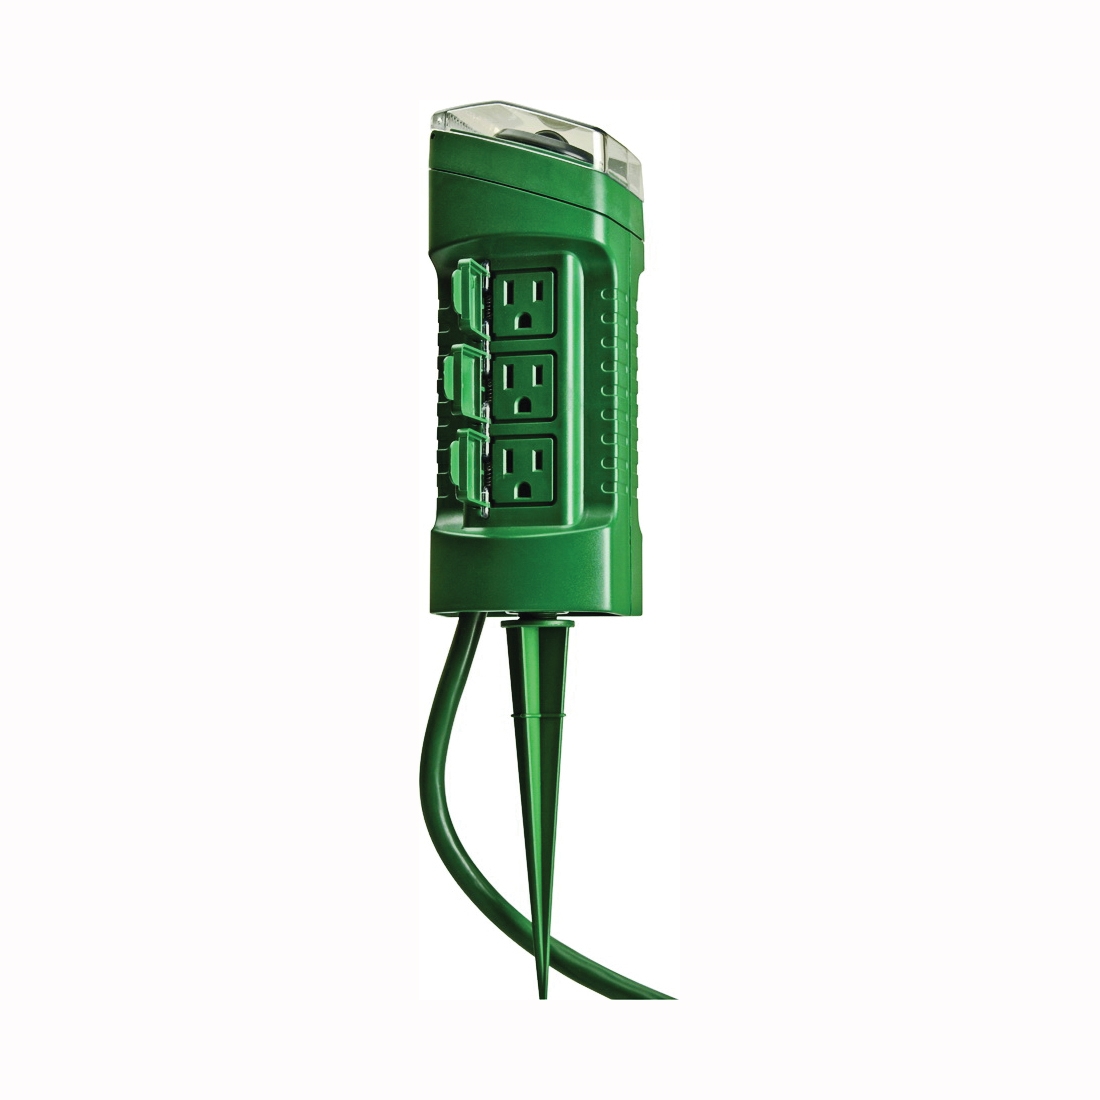 CCI 13547 Power Stake, 15 A, 125 V, 1875 W, 6 -Outlet, Green - 1